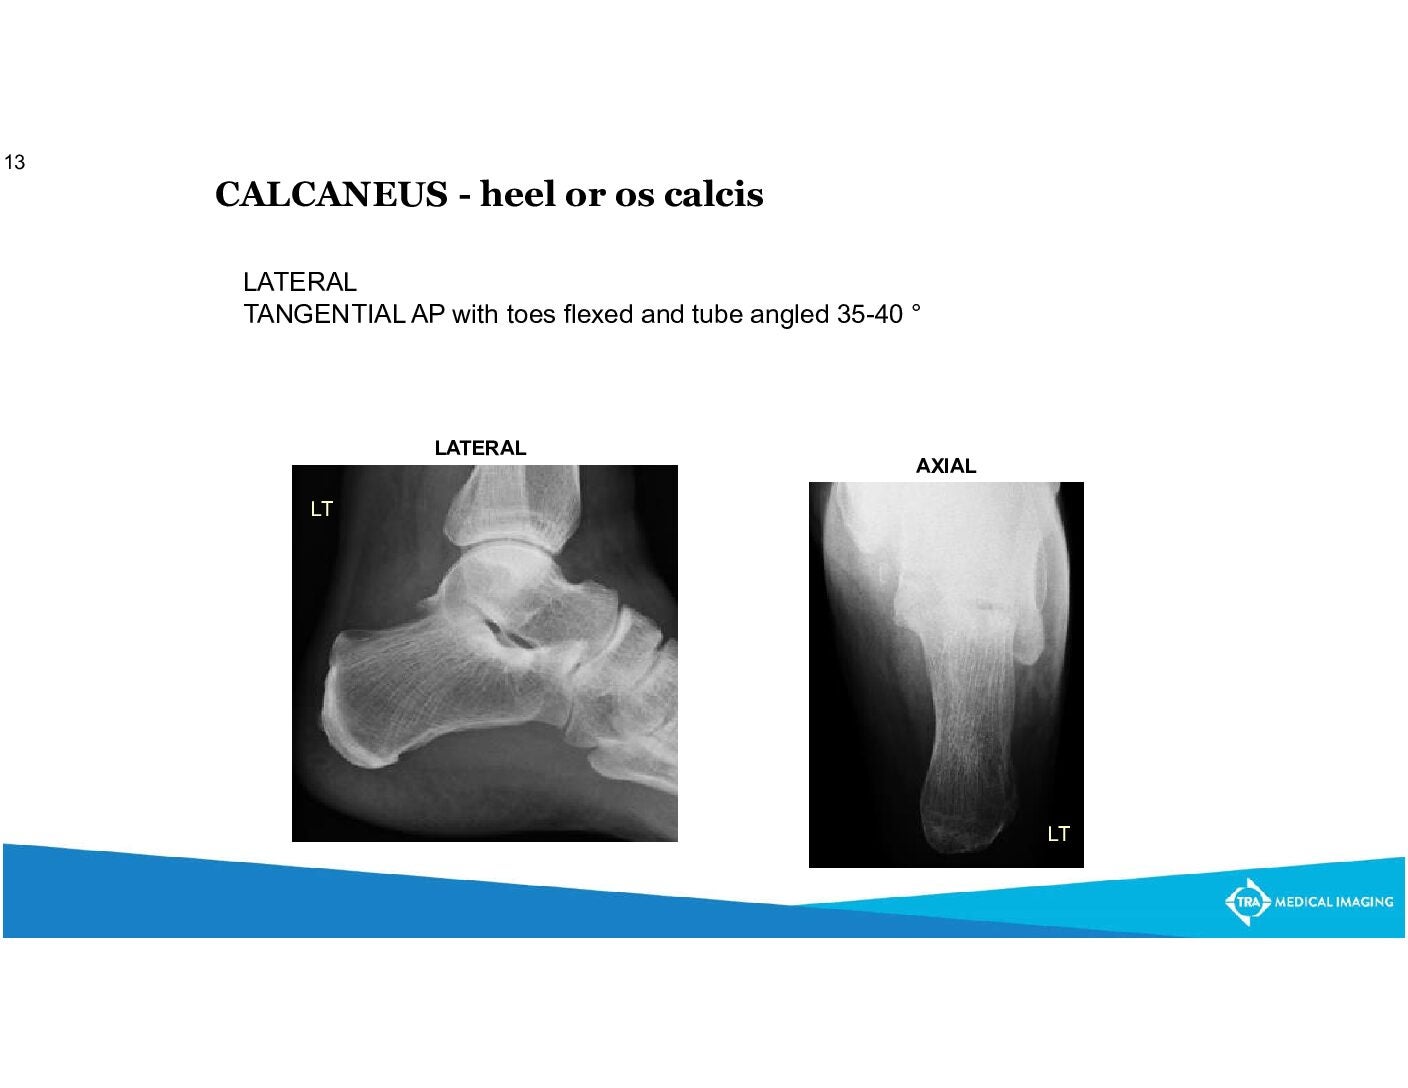 Film Ankle Xray Radiograph Showing Heel Stock Photo 1490402393 |  Shutterstock